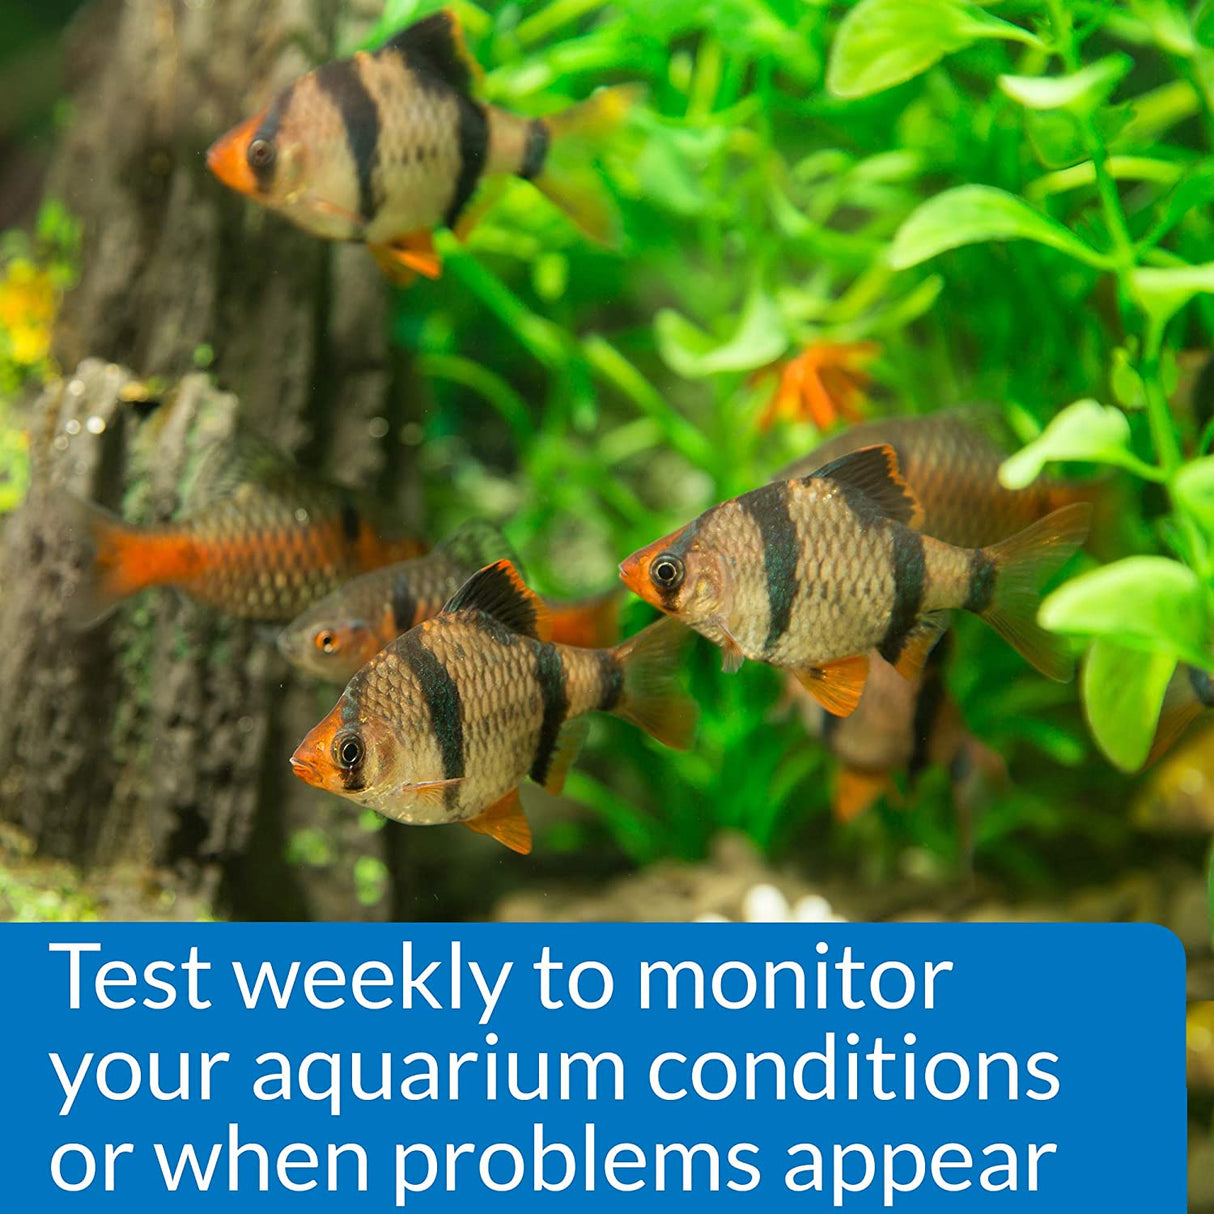 API Phosphate Test Kit for Freshwater and Saltwater Aquariums - PetMountain.com